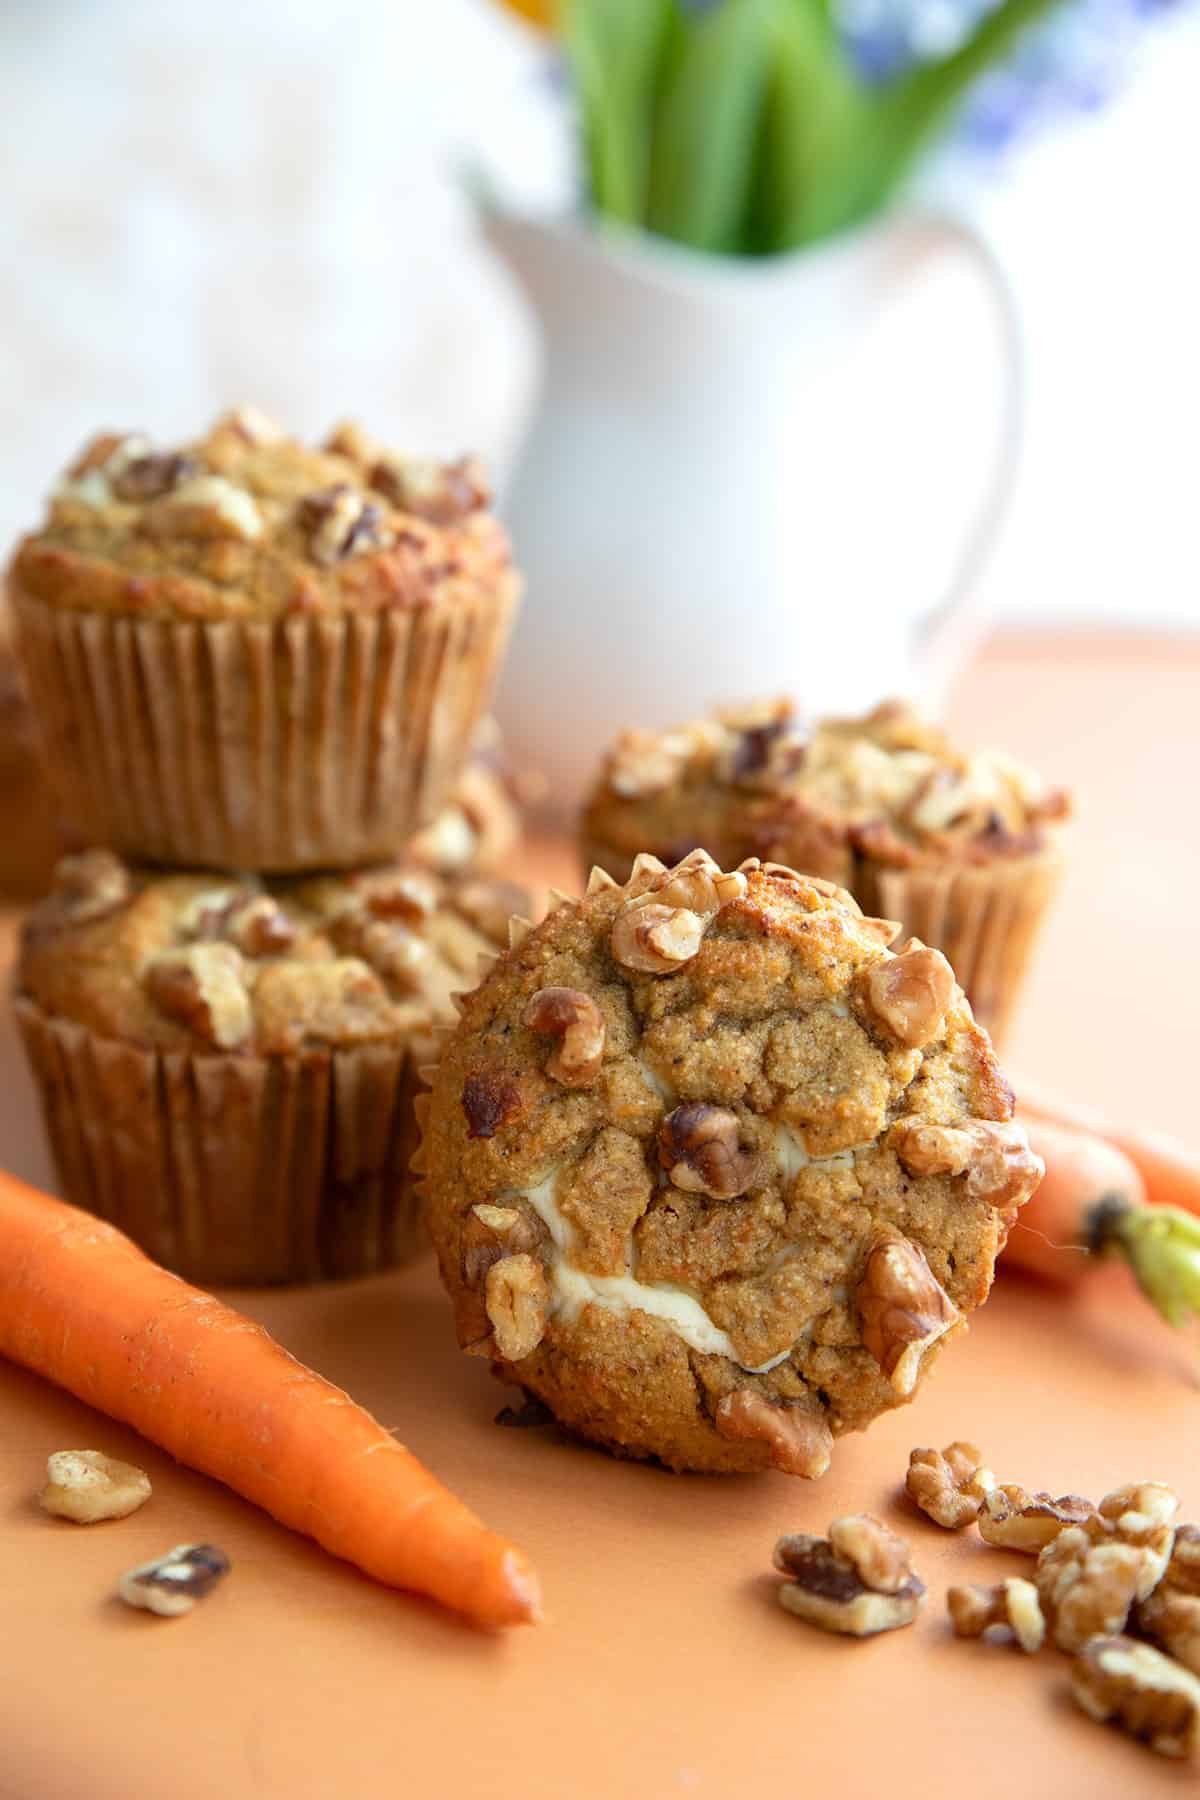 Keto Carrot Muffins piled up on a table top with a vase of spring flowers in the background.